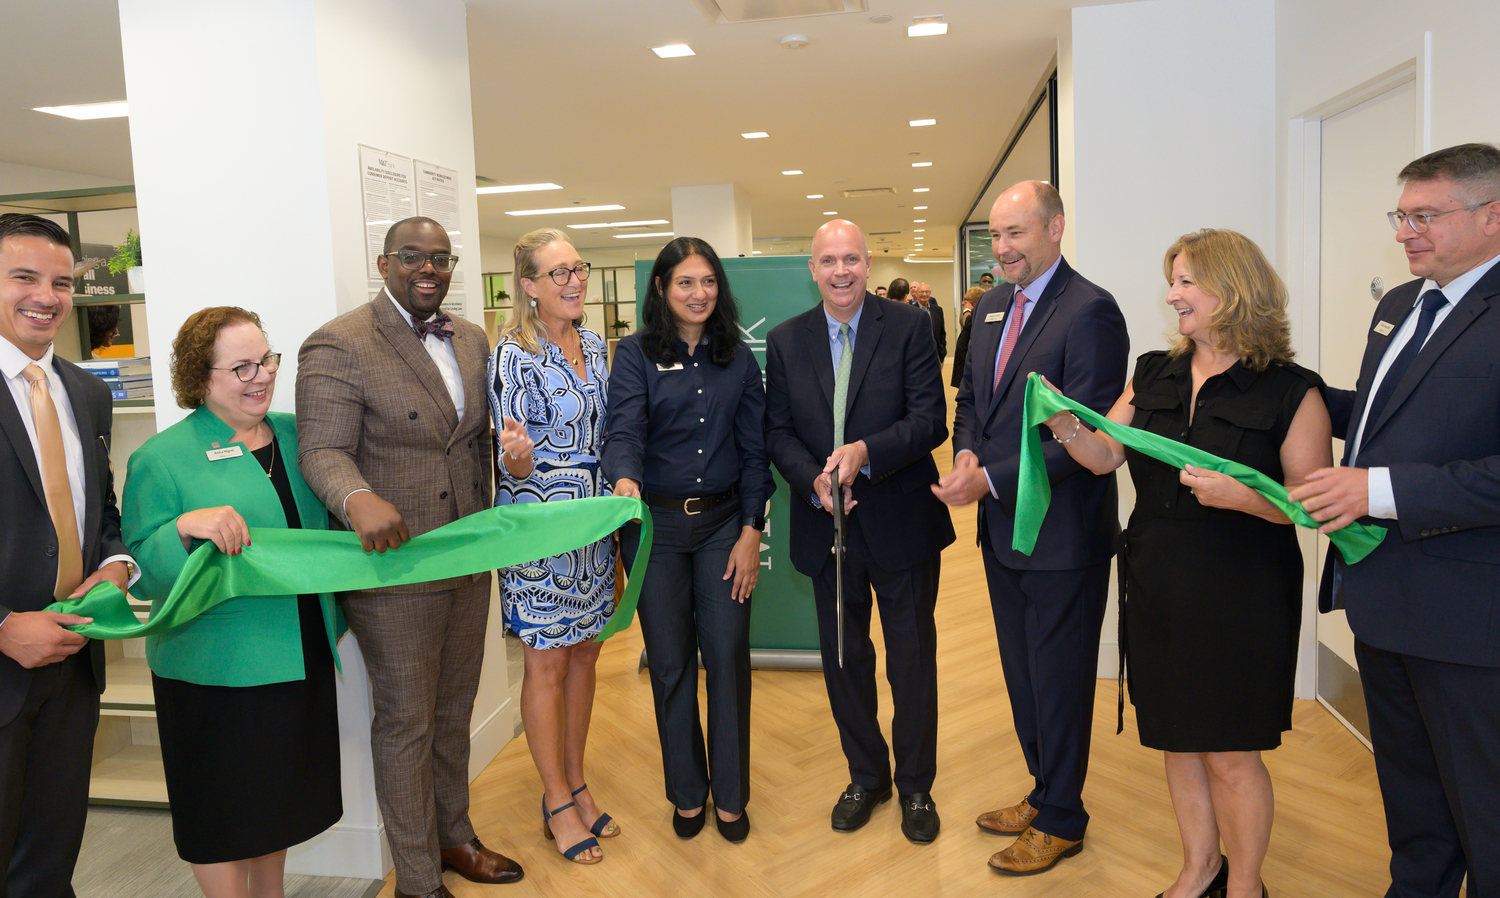 M&T Bank officials gathered for a ribbon cutting in Westhampton Beach on September 12.